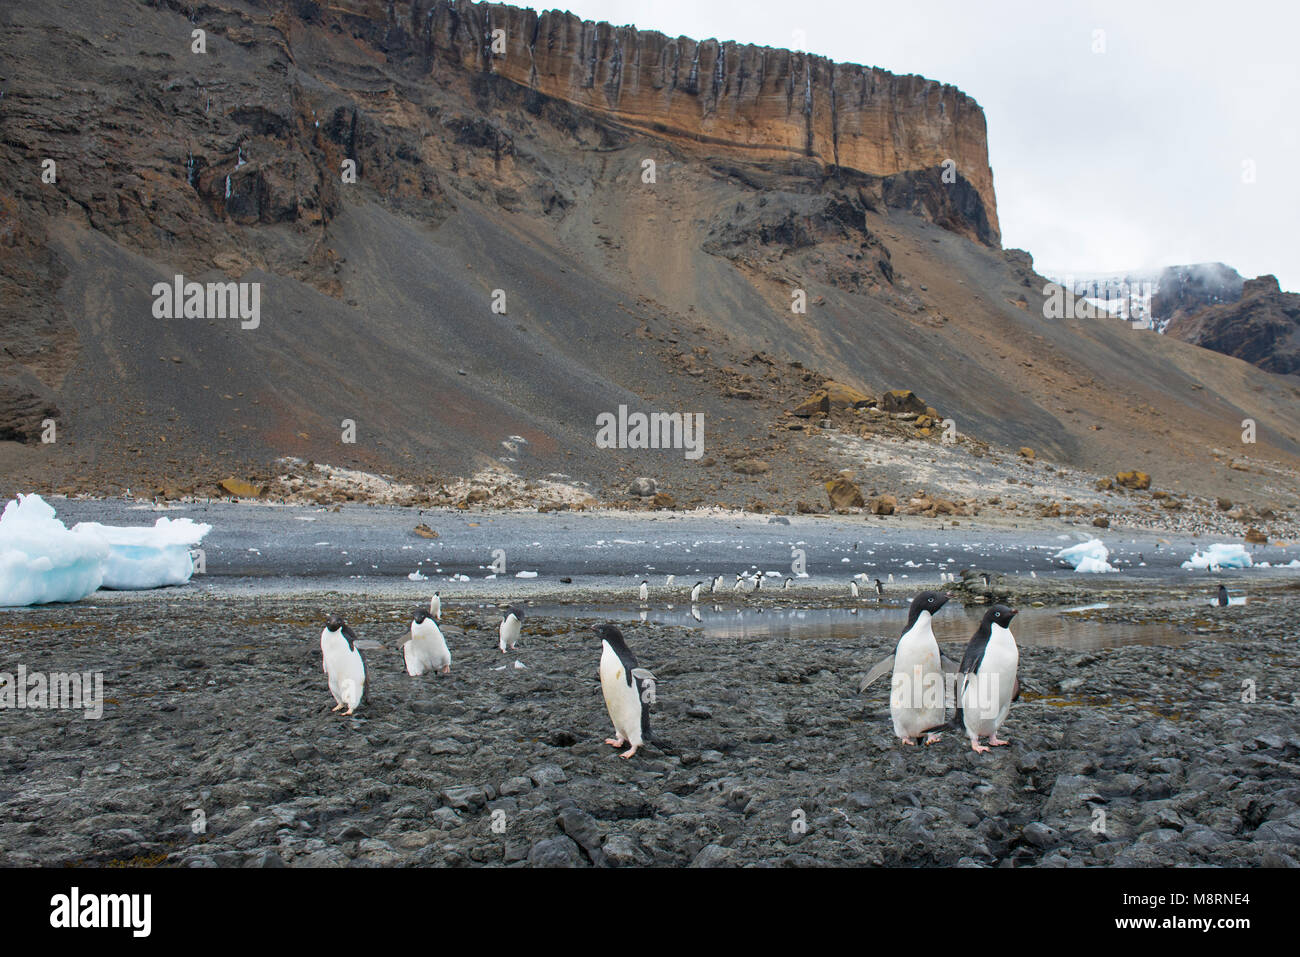 A group of Adelie penguins walk along the rocky shoreline at Brown Bluff, Antarctica. Stock Photo